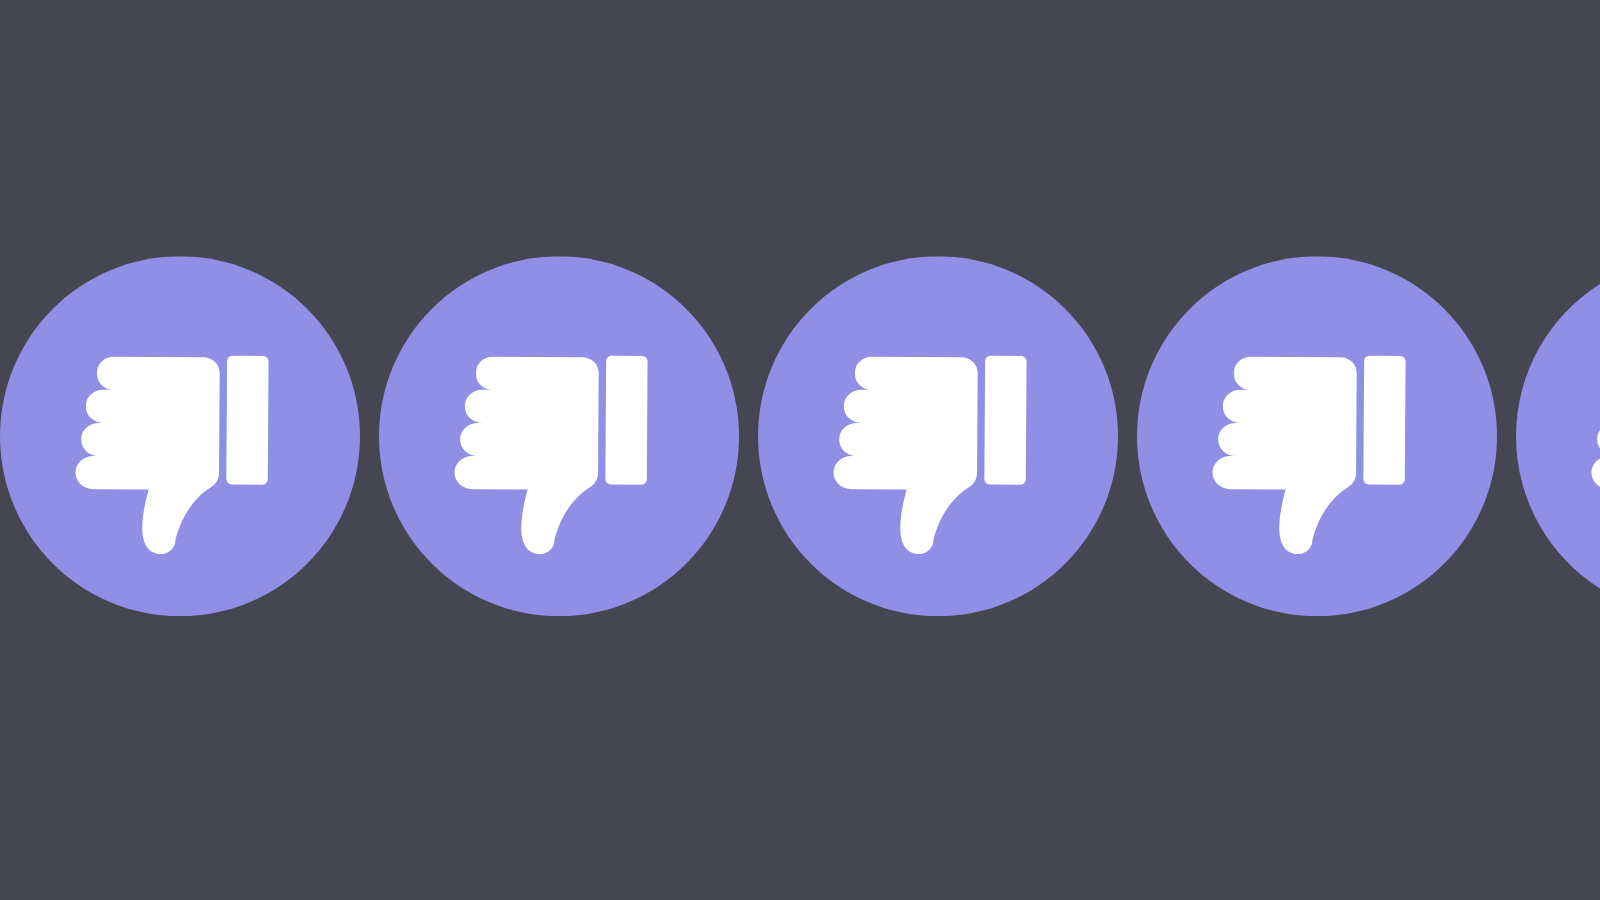 A row of thumbs down icons in purple circles